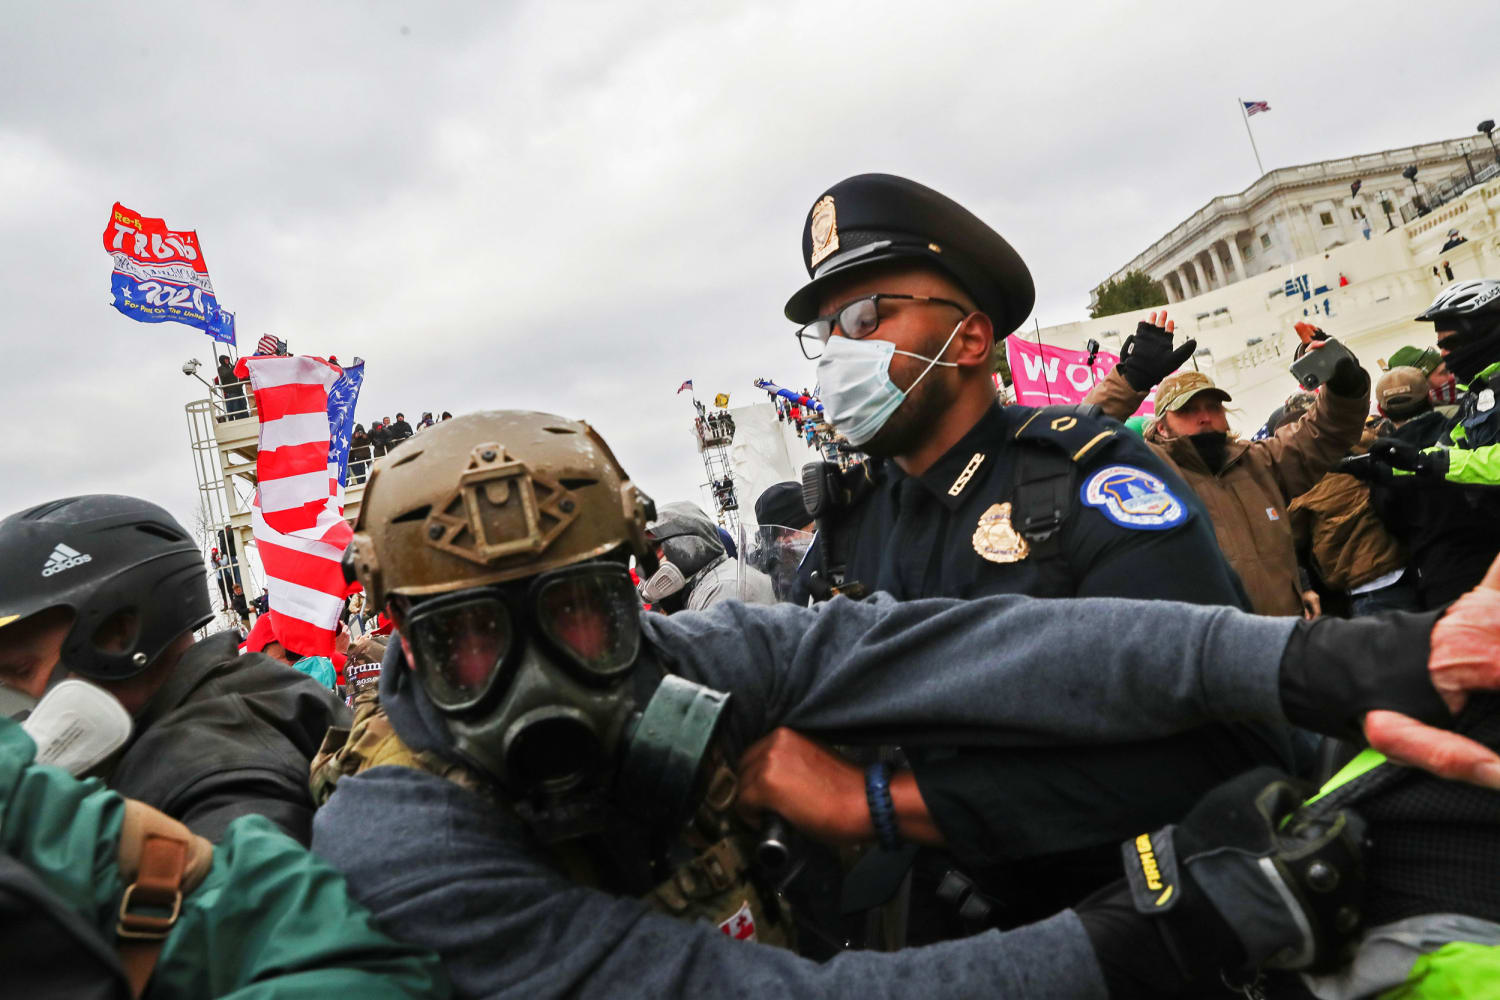 american riot police pose